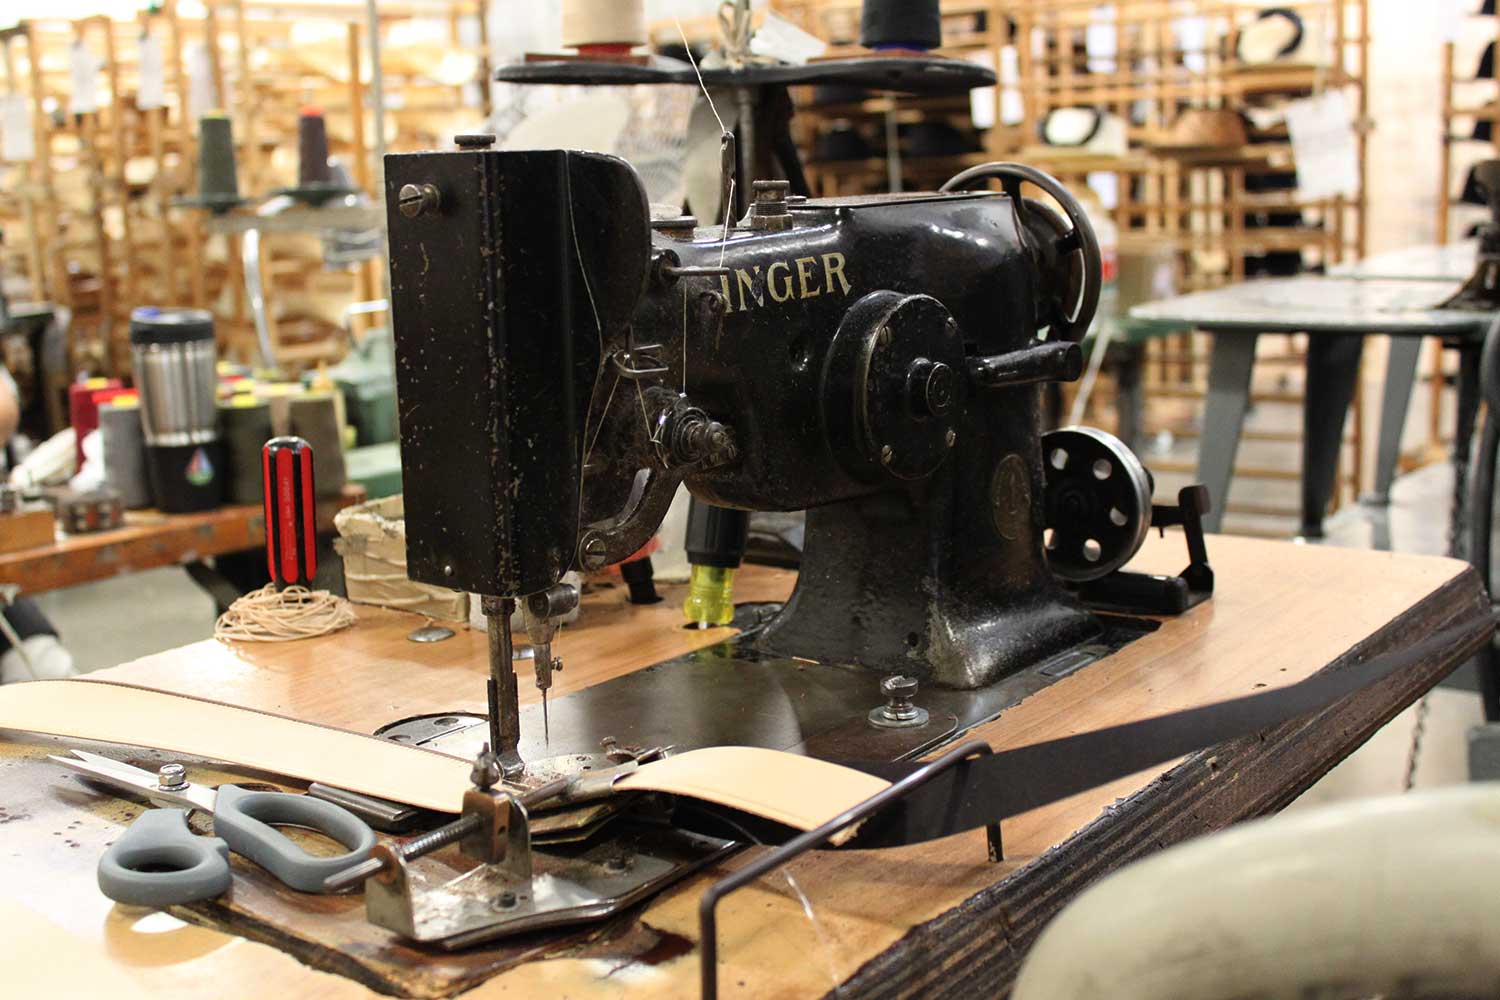 A very old black Singer sewing machine resting on a wooden table